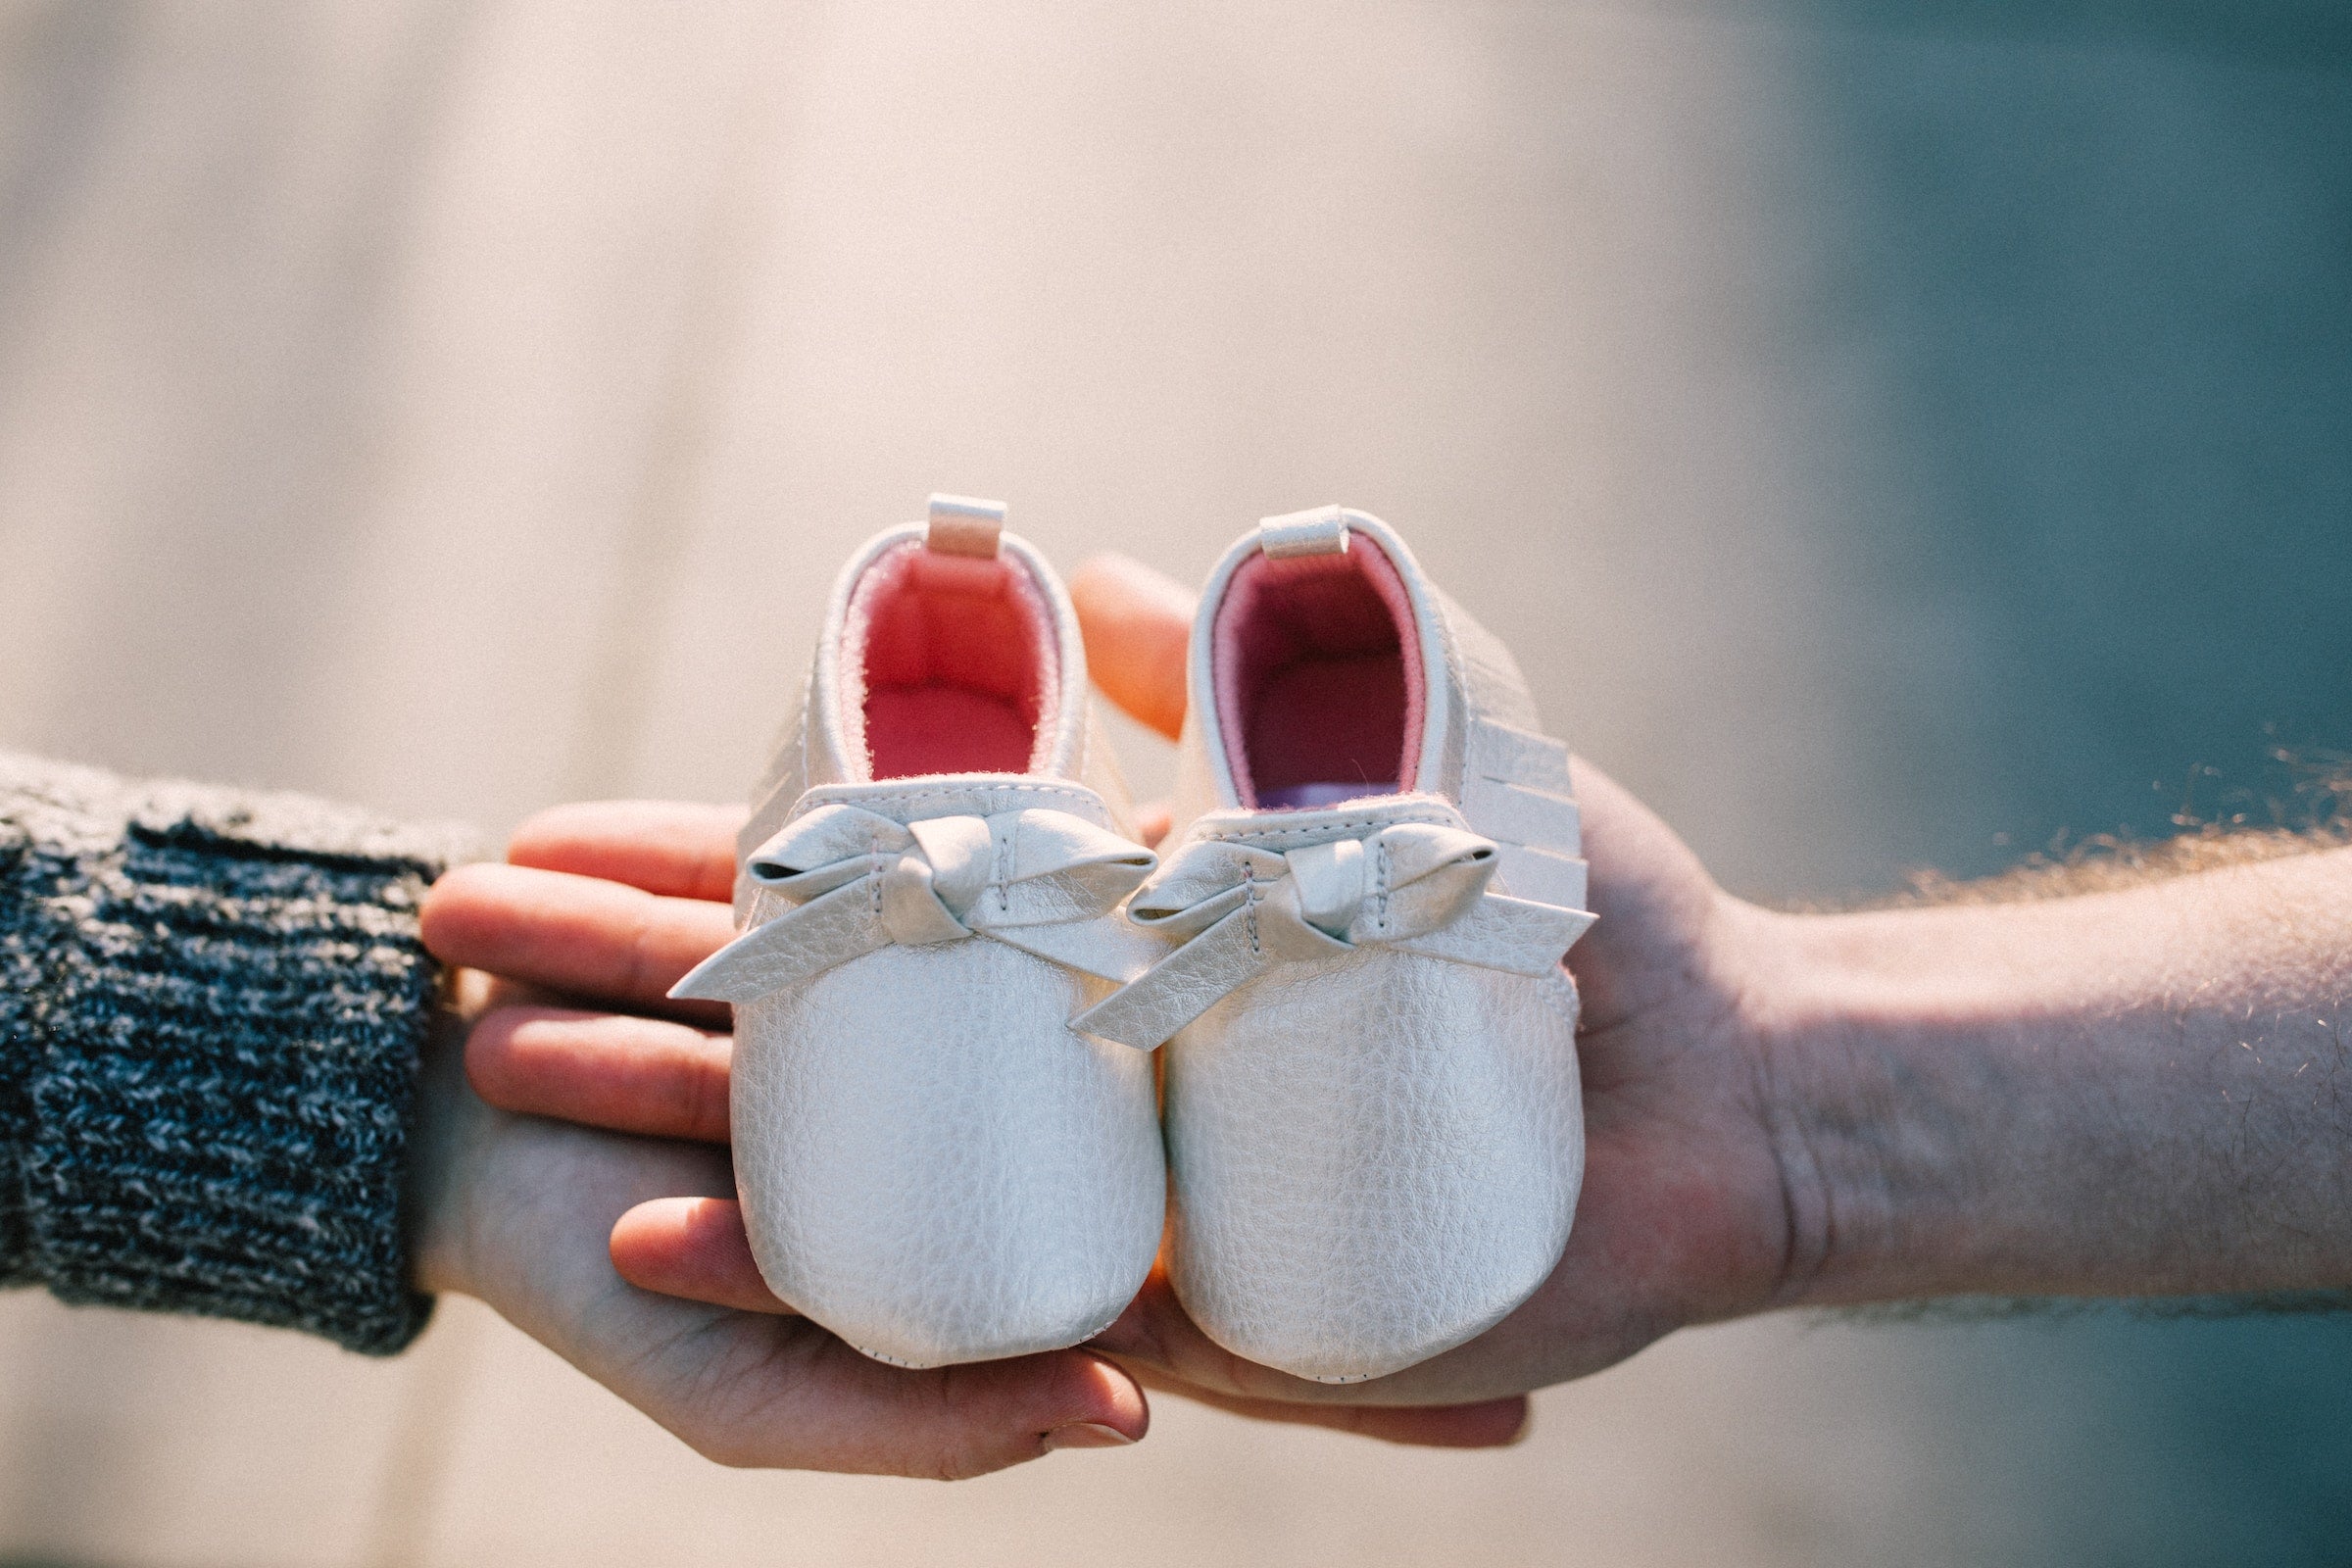 couple holding baby shoes